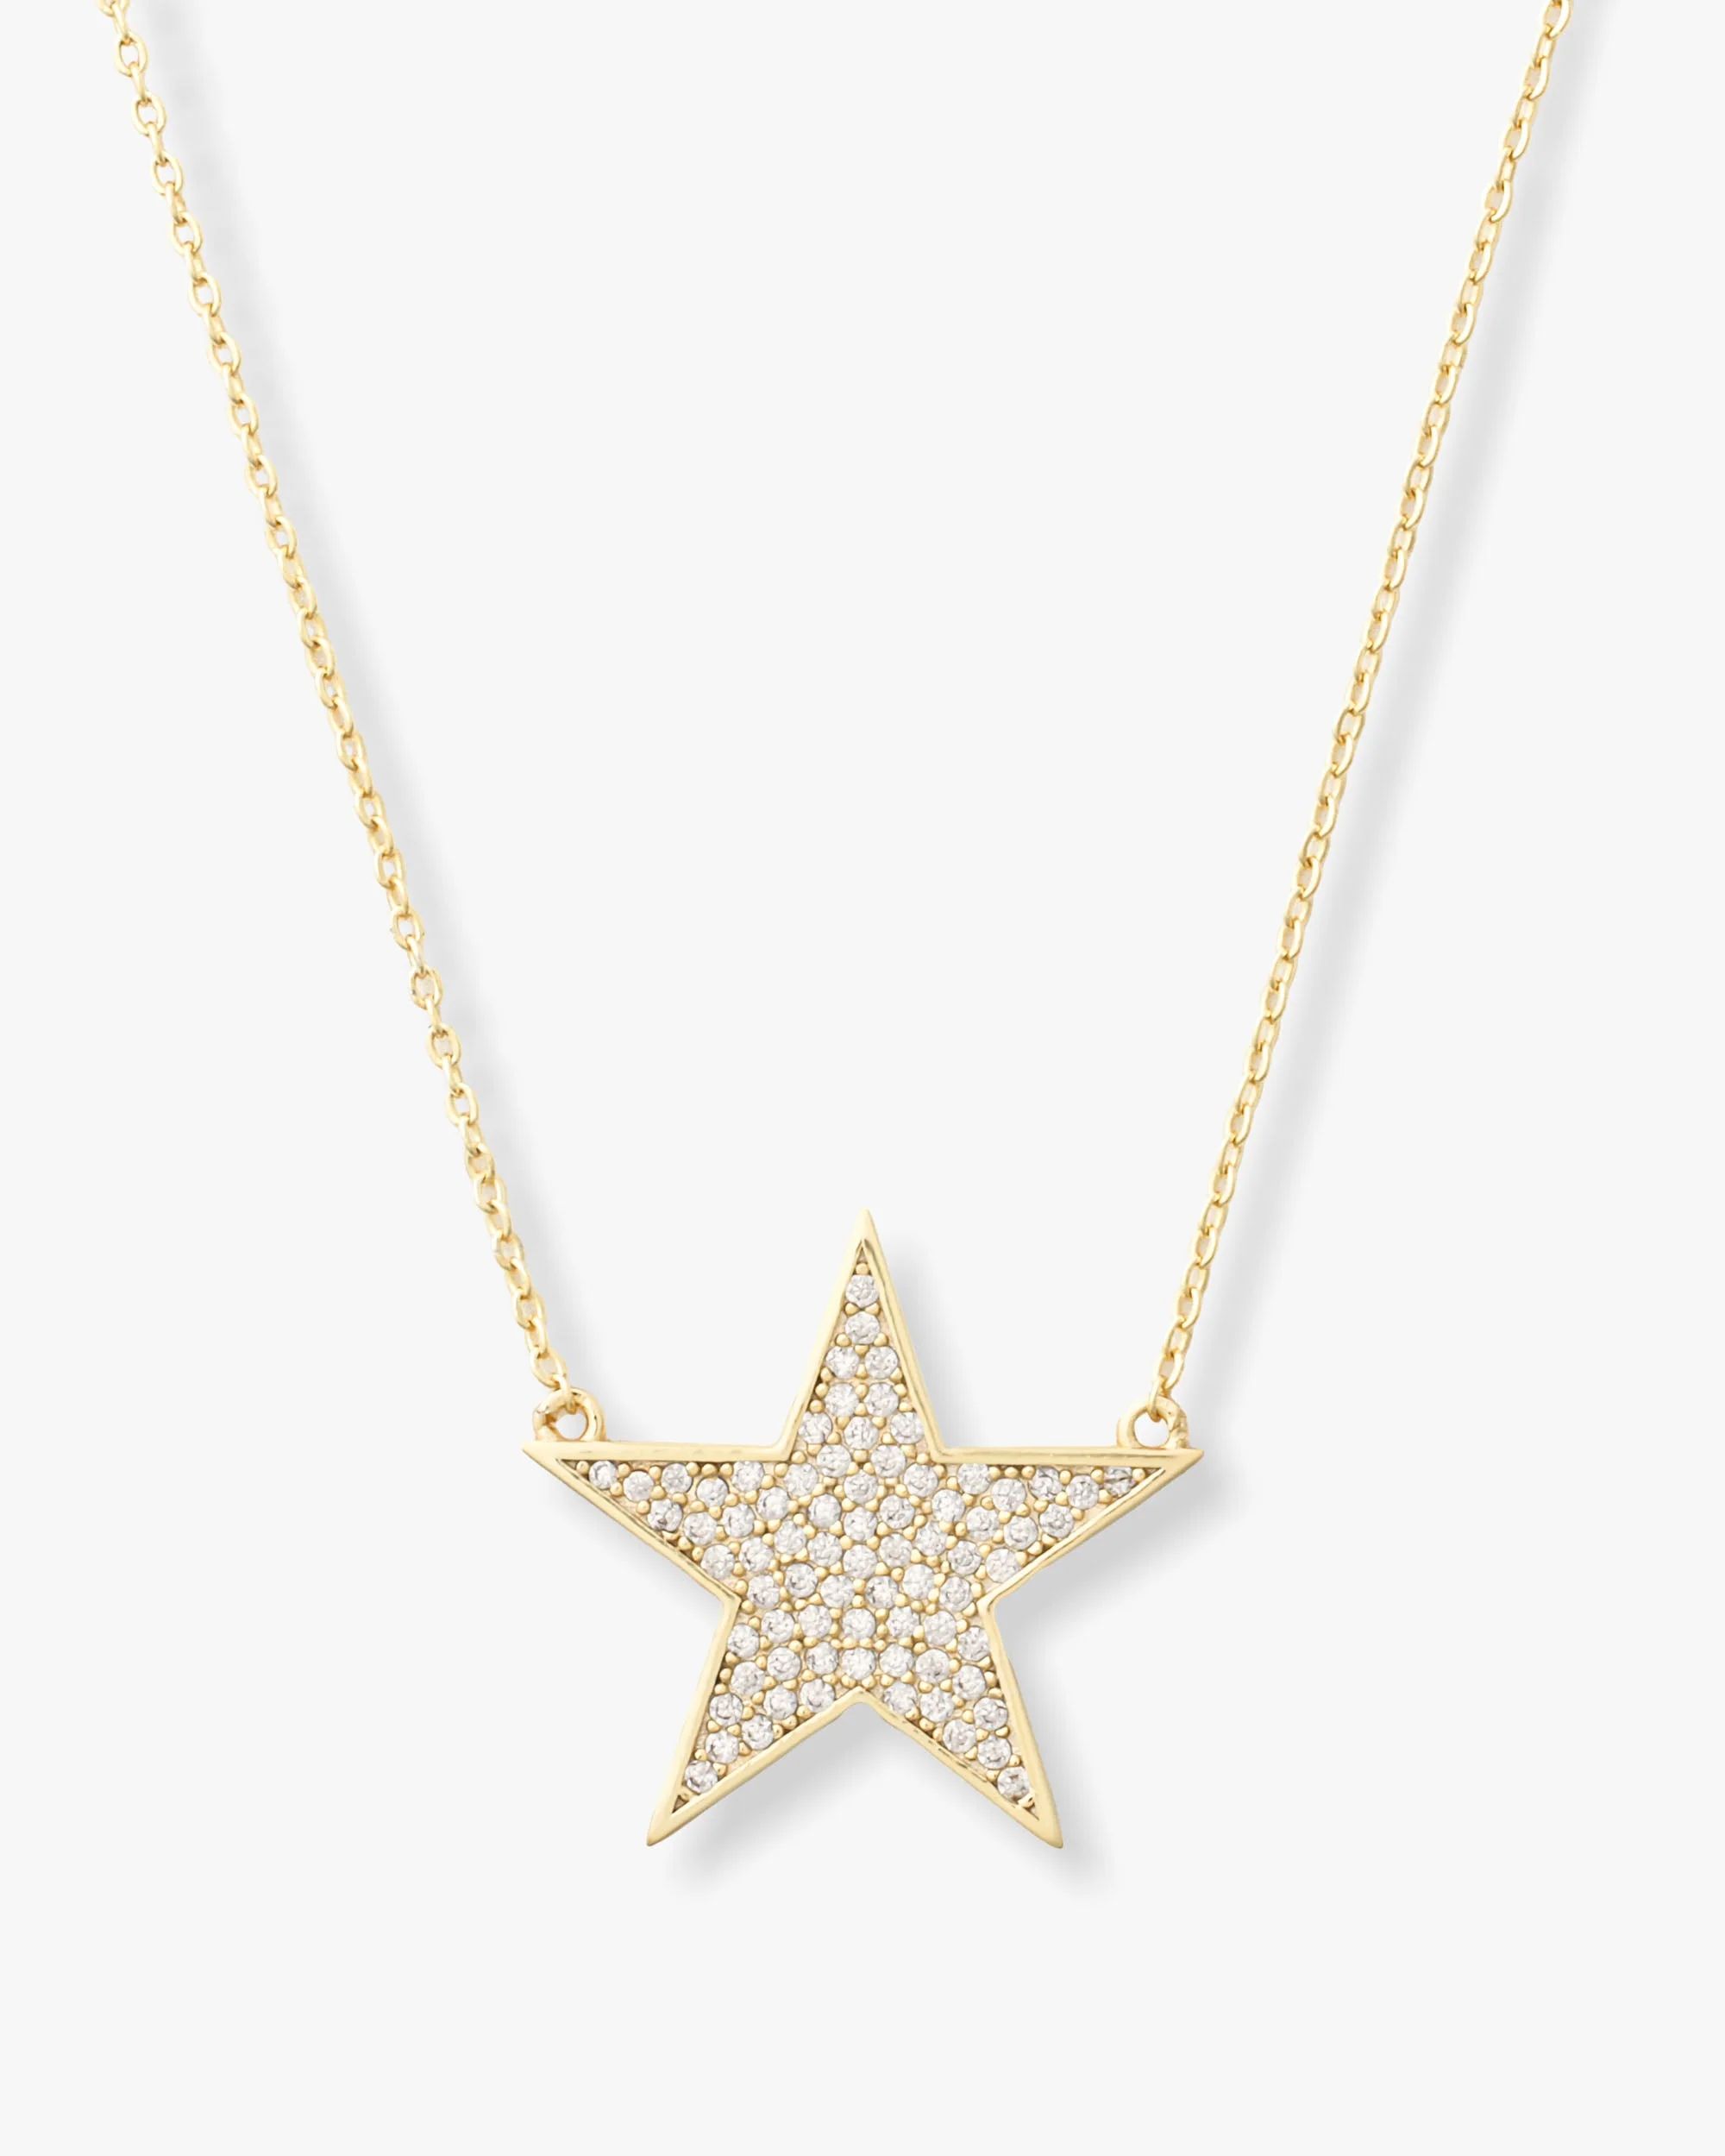 You Are My Shining Star Pave Necklace 15" - Gold|White Diamondettes | Melinda Maria